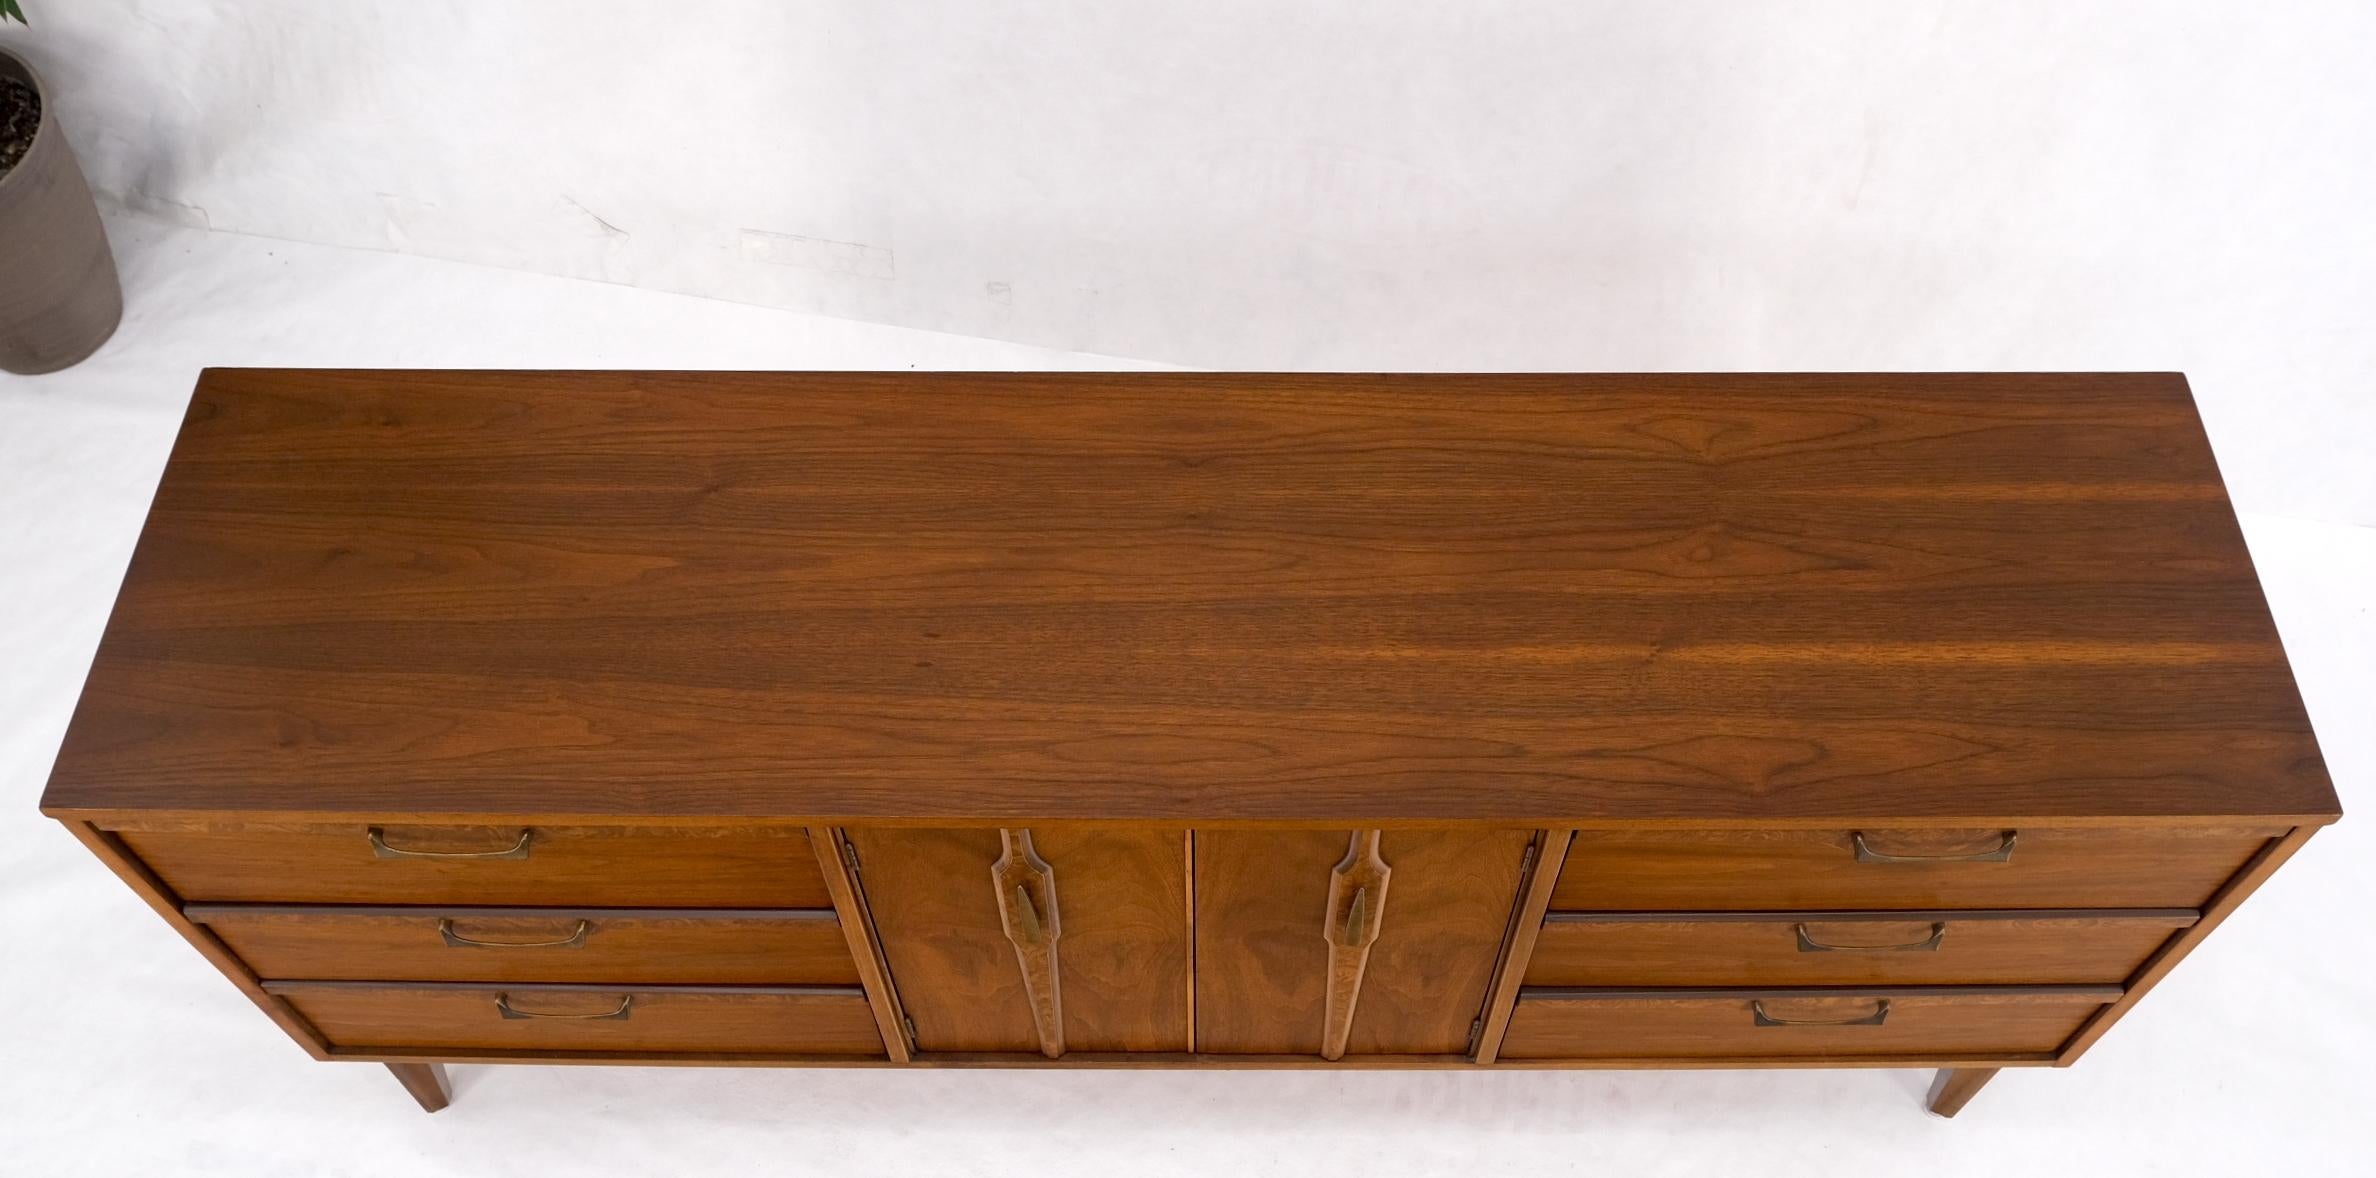 Long Walnut 9 Drawers Two Doors Mid-Century Modern Dresser Credenza Burl Accents For Sale 2